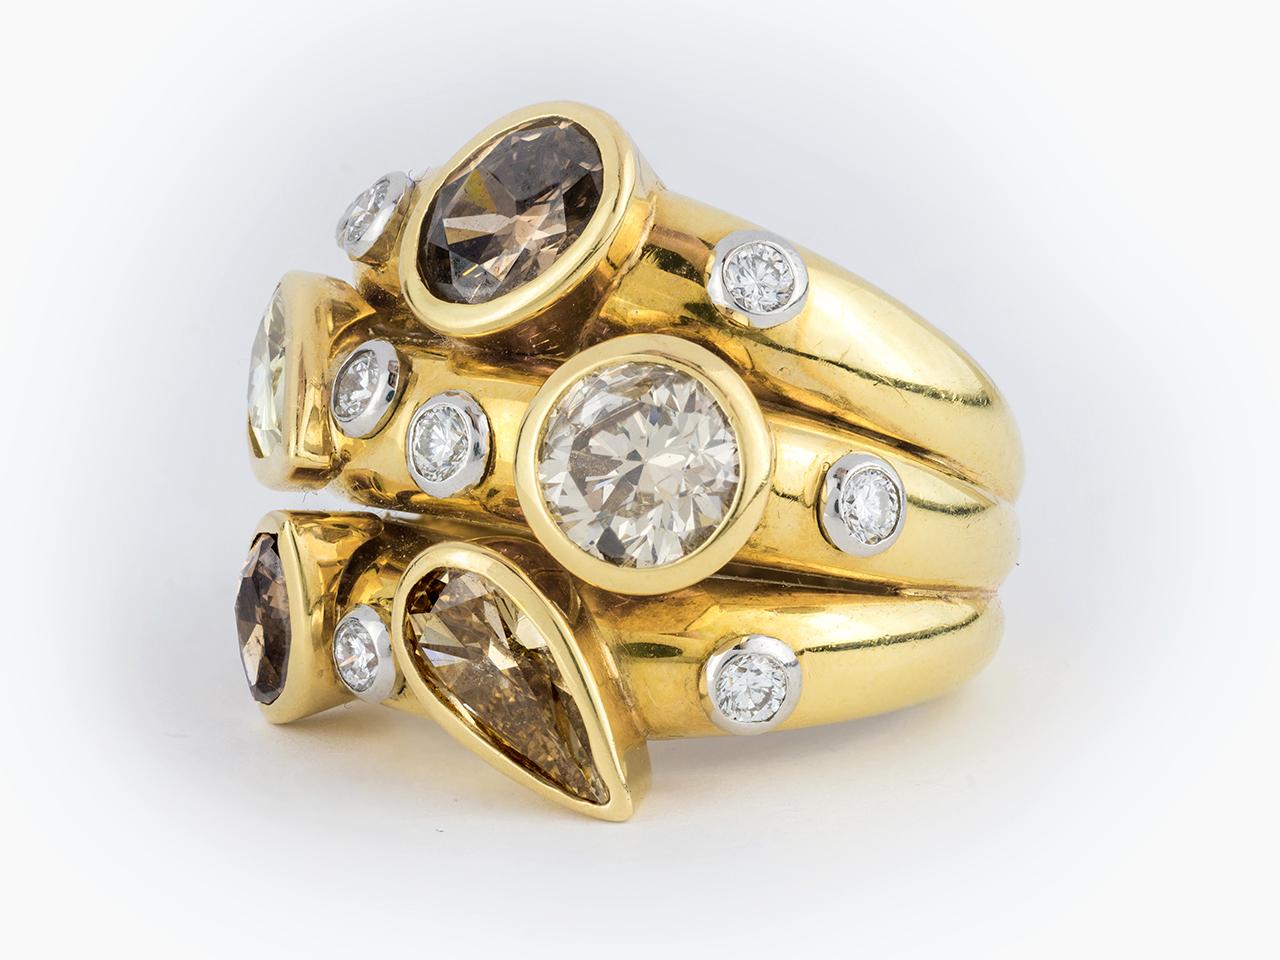 18k gold triple stack ring, set with white, champagne and fancy brown diamonds. Signed DAVID WEBB 900PT. Similar ring in last Webb book. Size 6